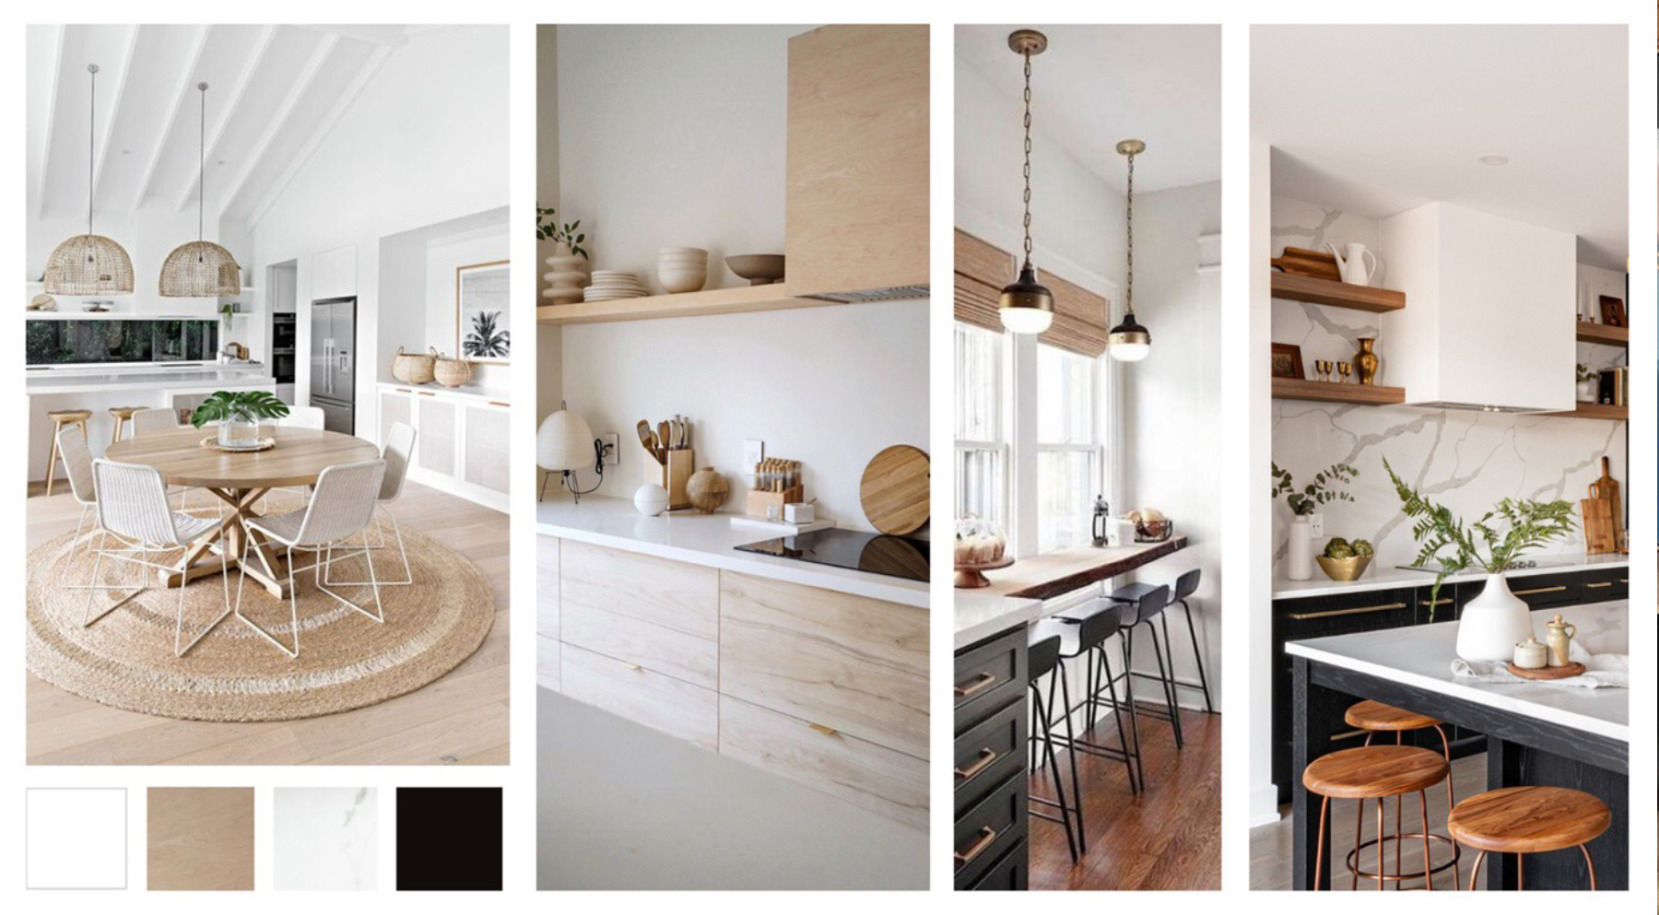 A collage featuring a Scandinavian kitchen and a contemporary kitchen designed using the same neutral colour palette.